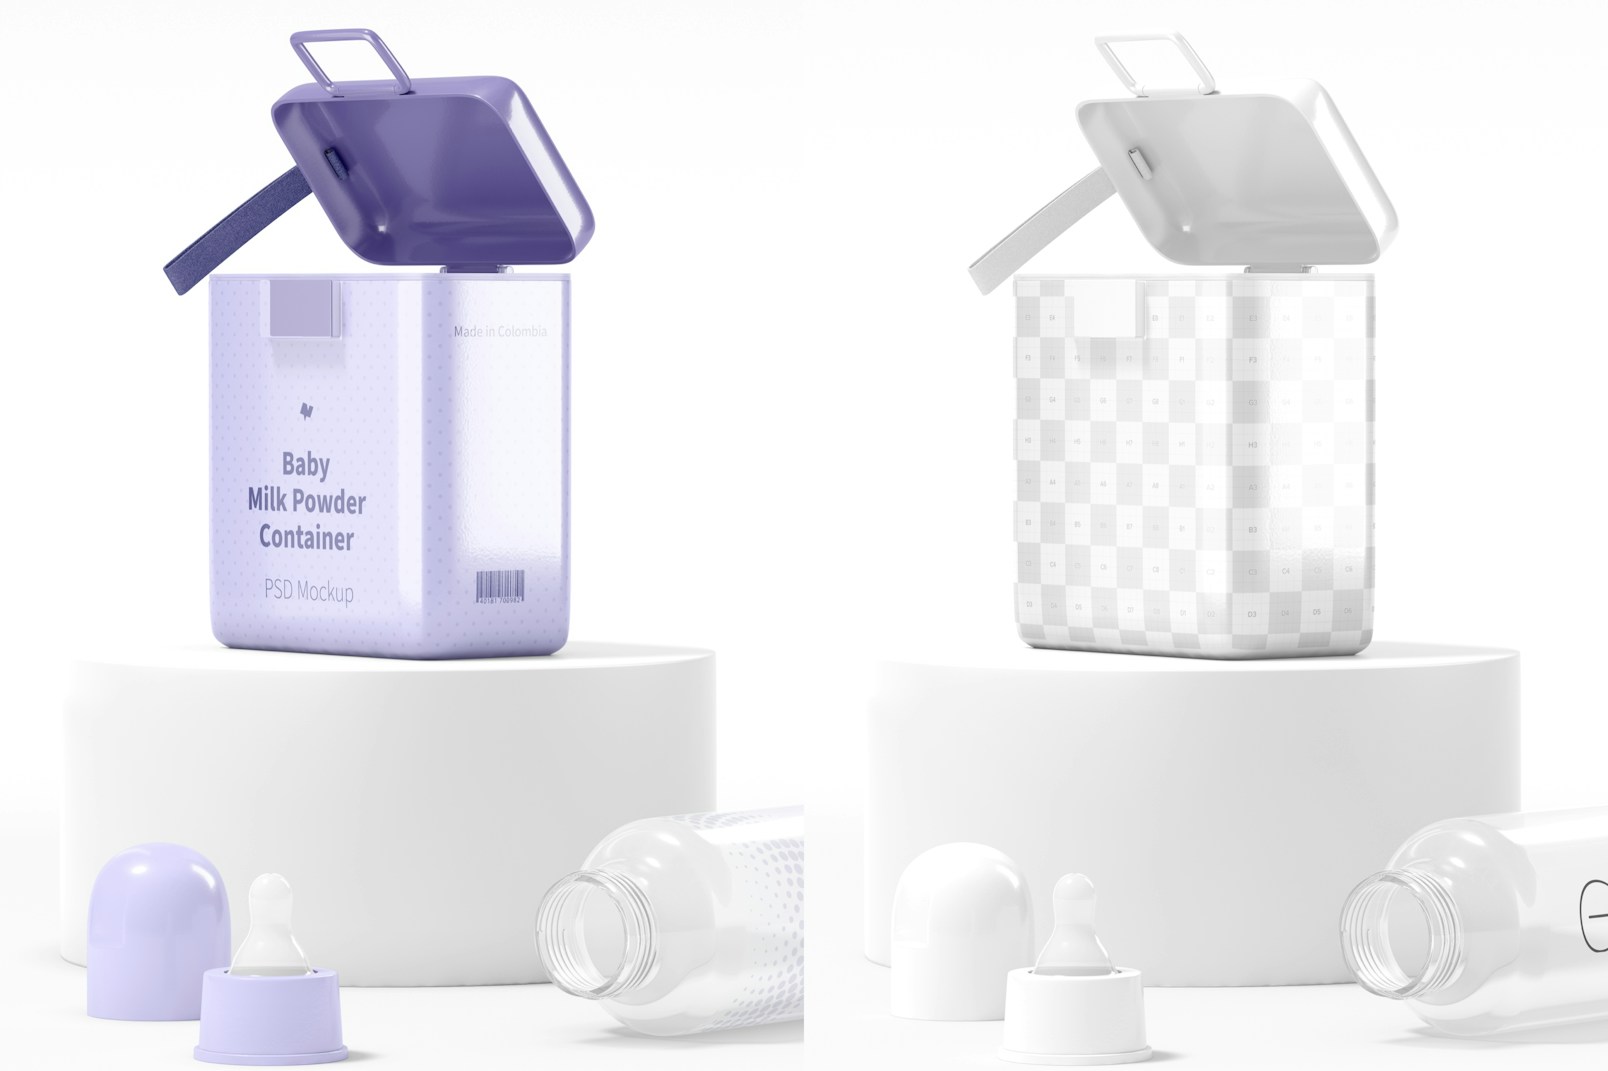 Large Baby Milk Powder Container Mockup